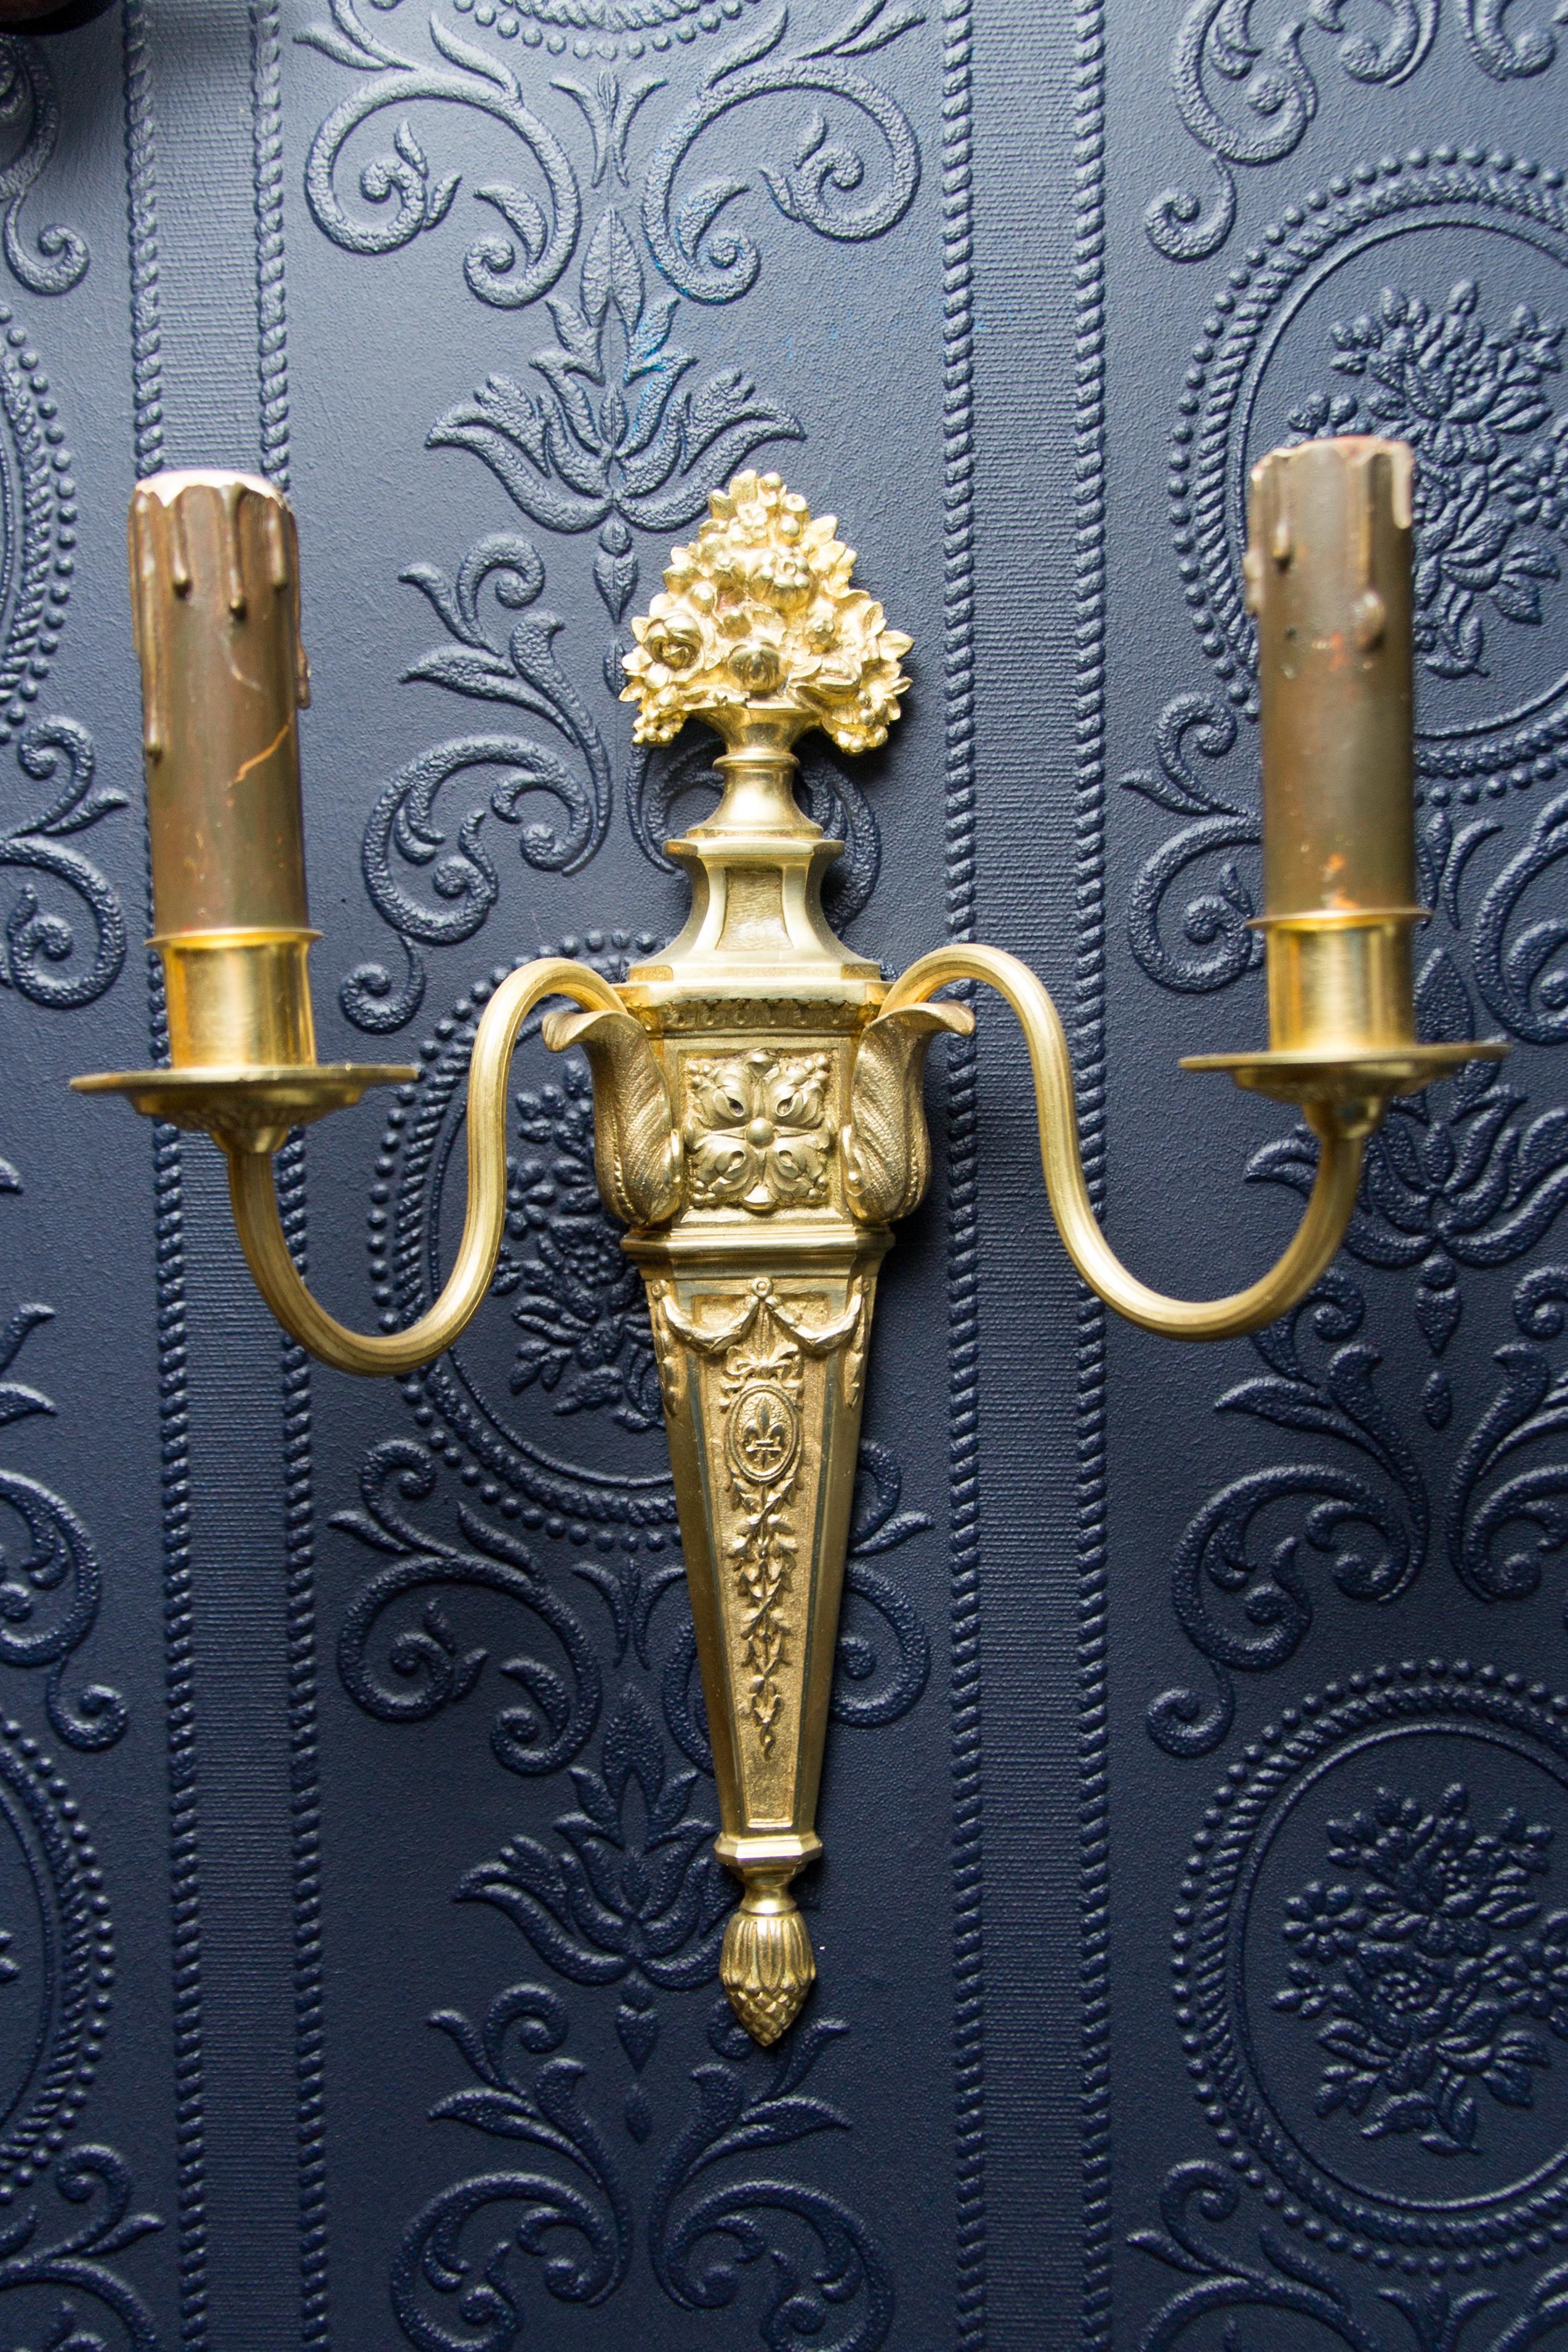 A pair of French early 20th century Louis XVI or neoclassical style gilt bronze sconces. Wall lights have been electrified. Richly decorated with bronze details, like flowers, acanthus leaves, royal French lily, fleur-de-lis, symbol.
Each sconce has